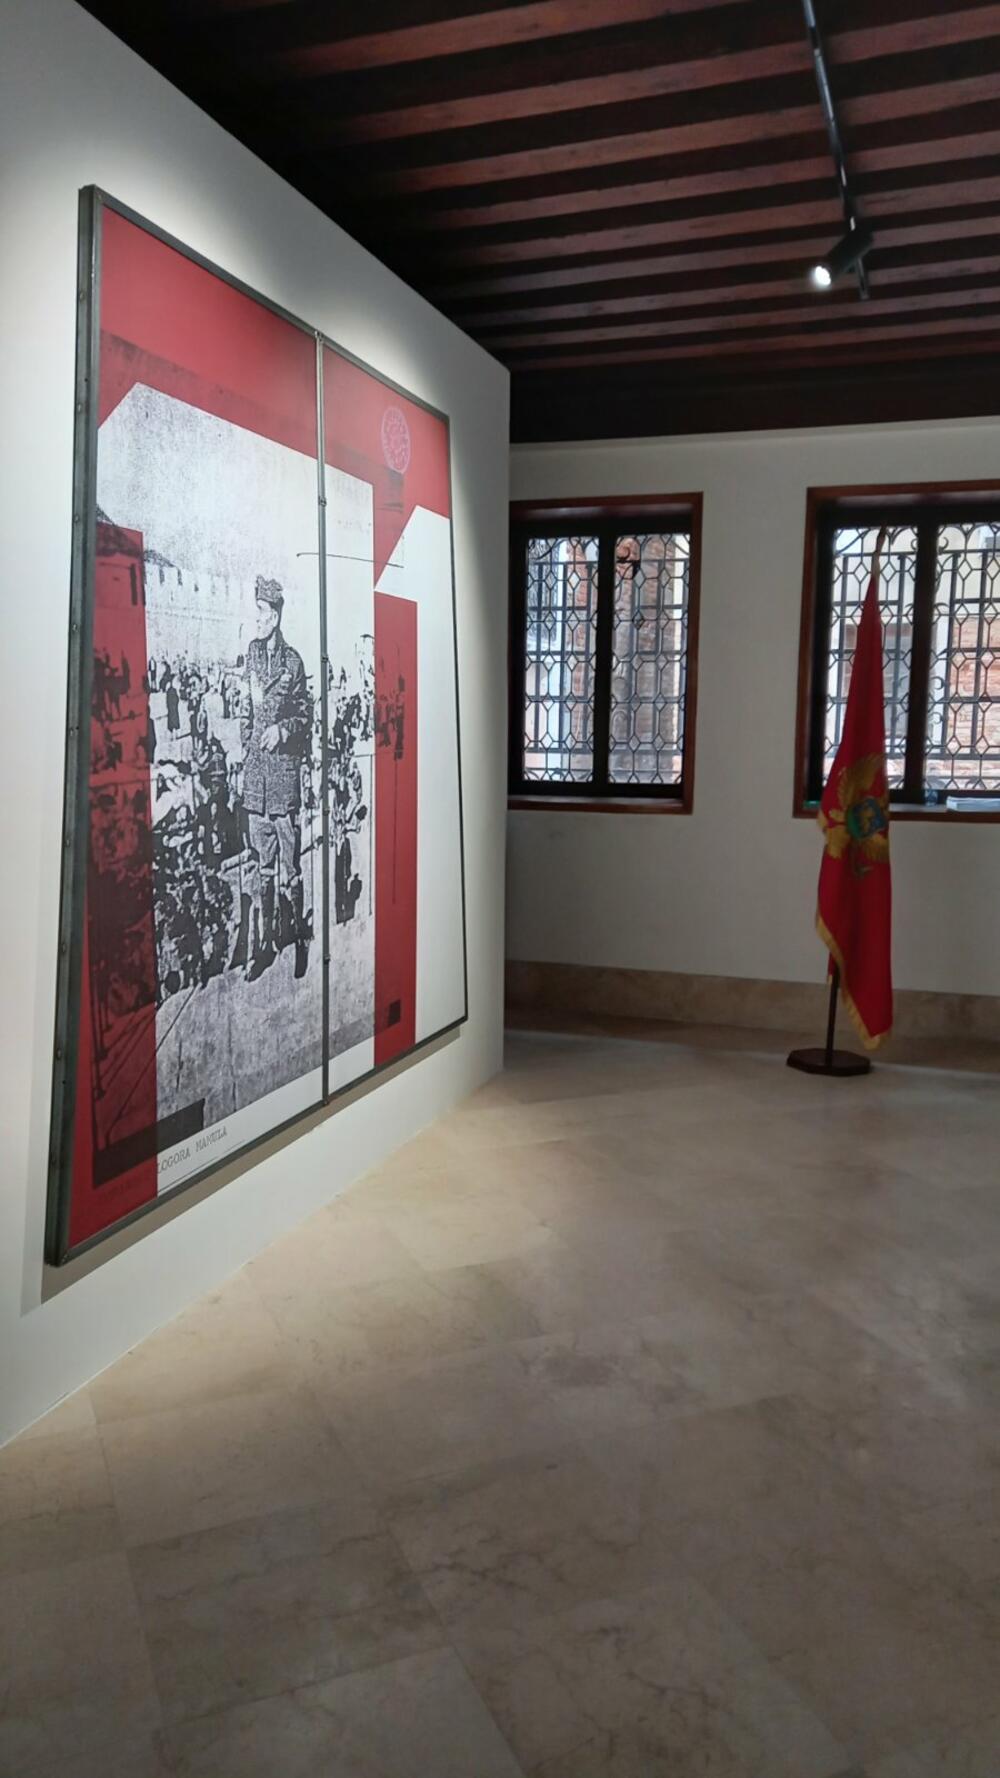 The Montenegrin pavilion was officially opened today in Venice, and the exhibition created by the young artist Darja Bajagić in cooperation with the curator Ana Simona Zelenović attracted a large audience.